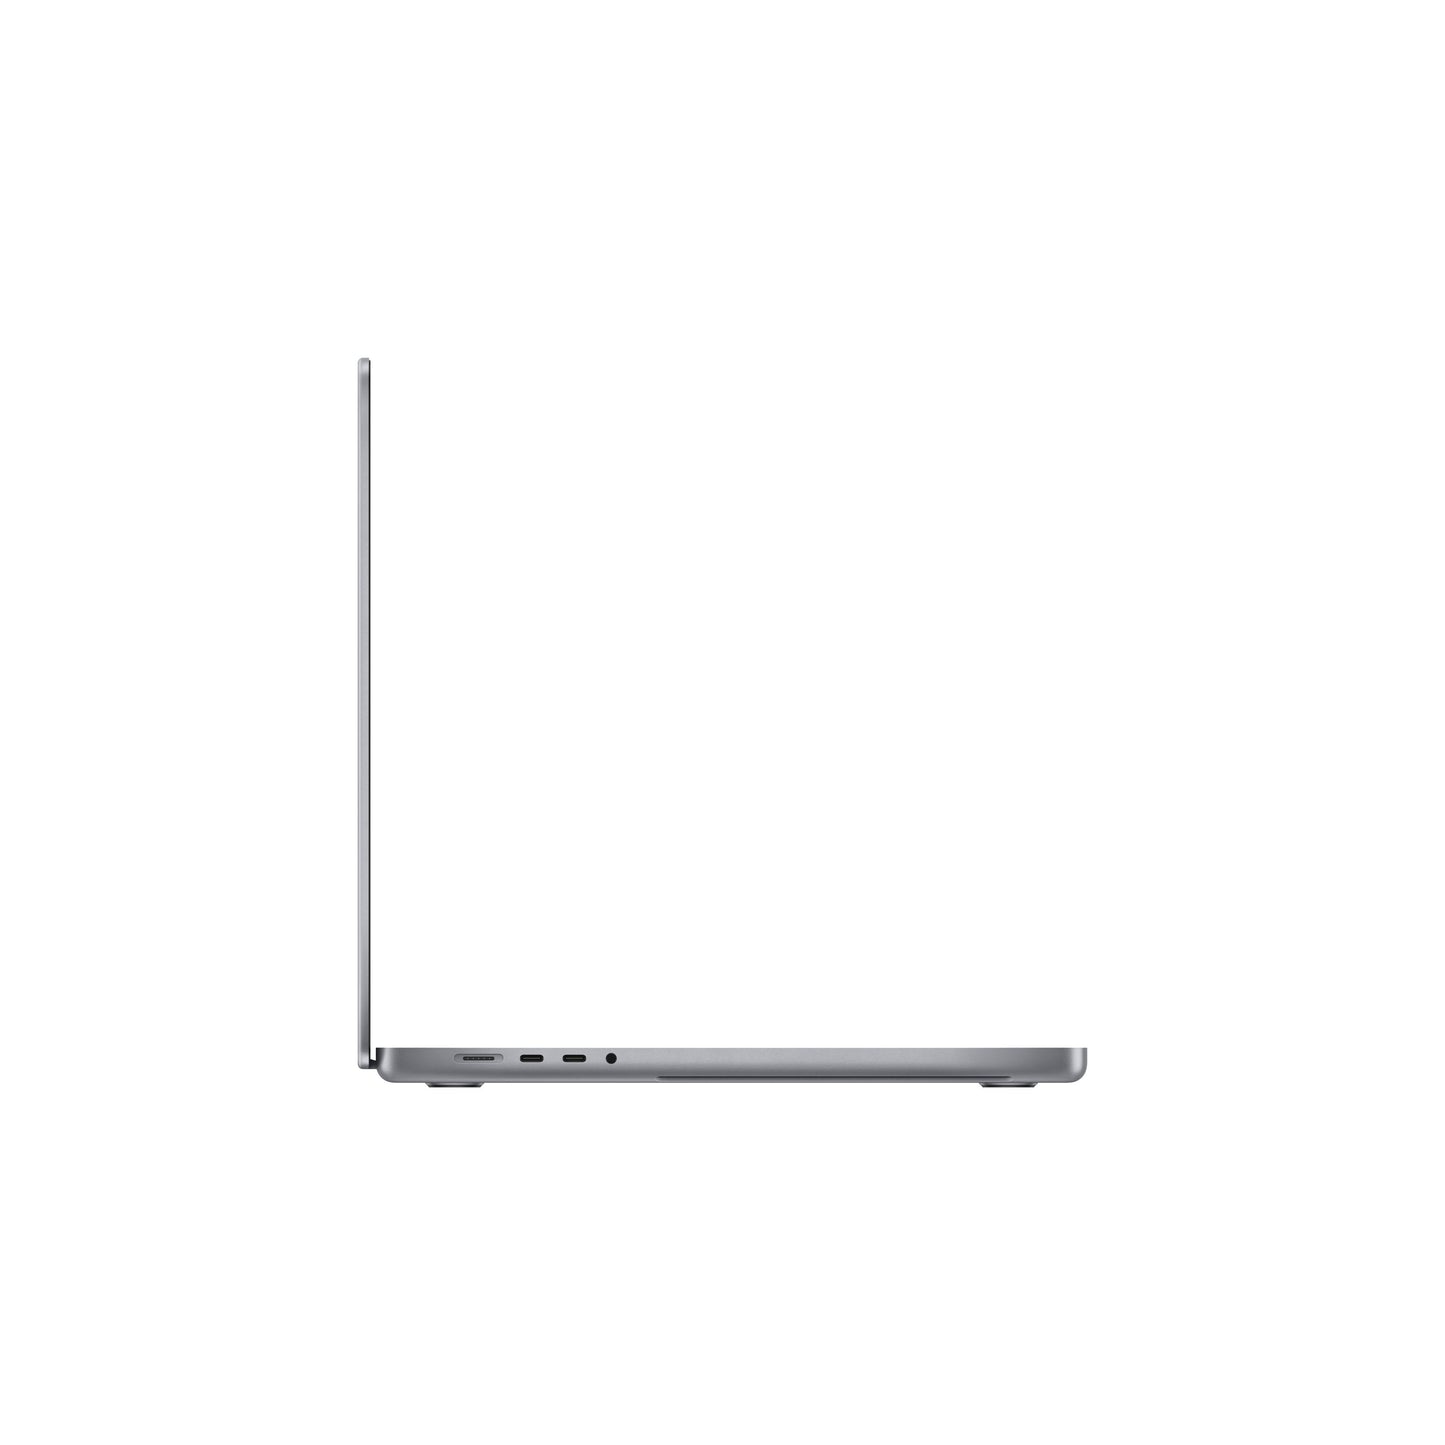 16-inch MacBook Pro: Apple M1 Pro chip with 10_core CPU and 16_core GPU, 1TB SSD - Space Grey